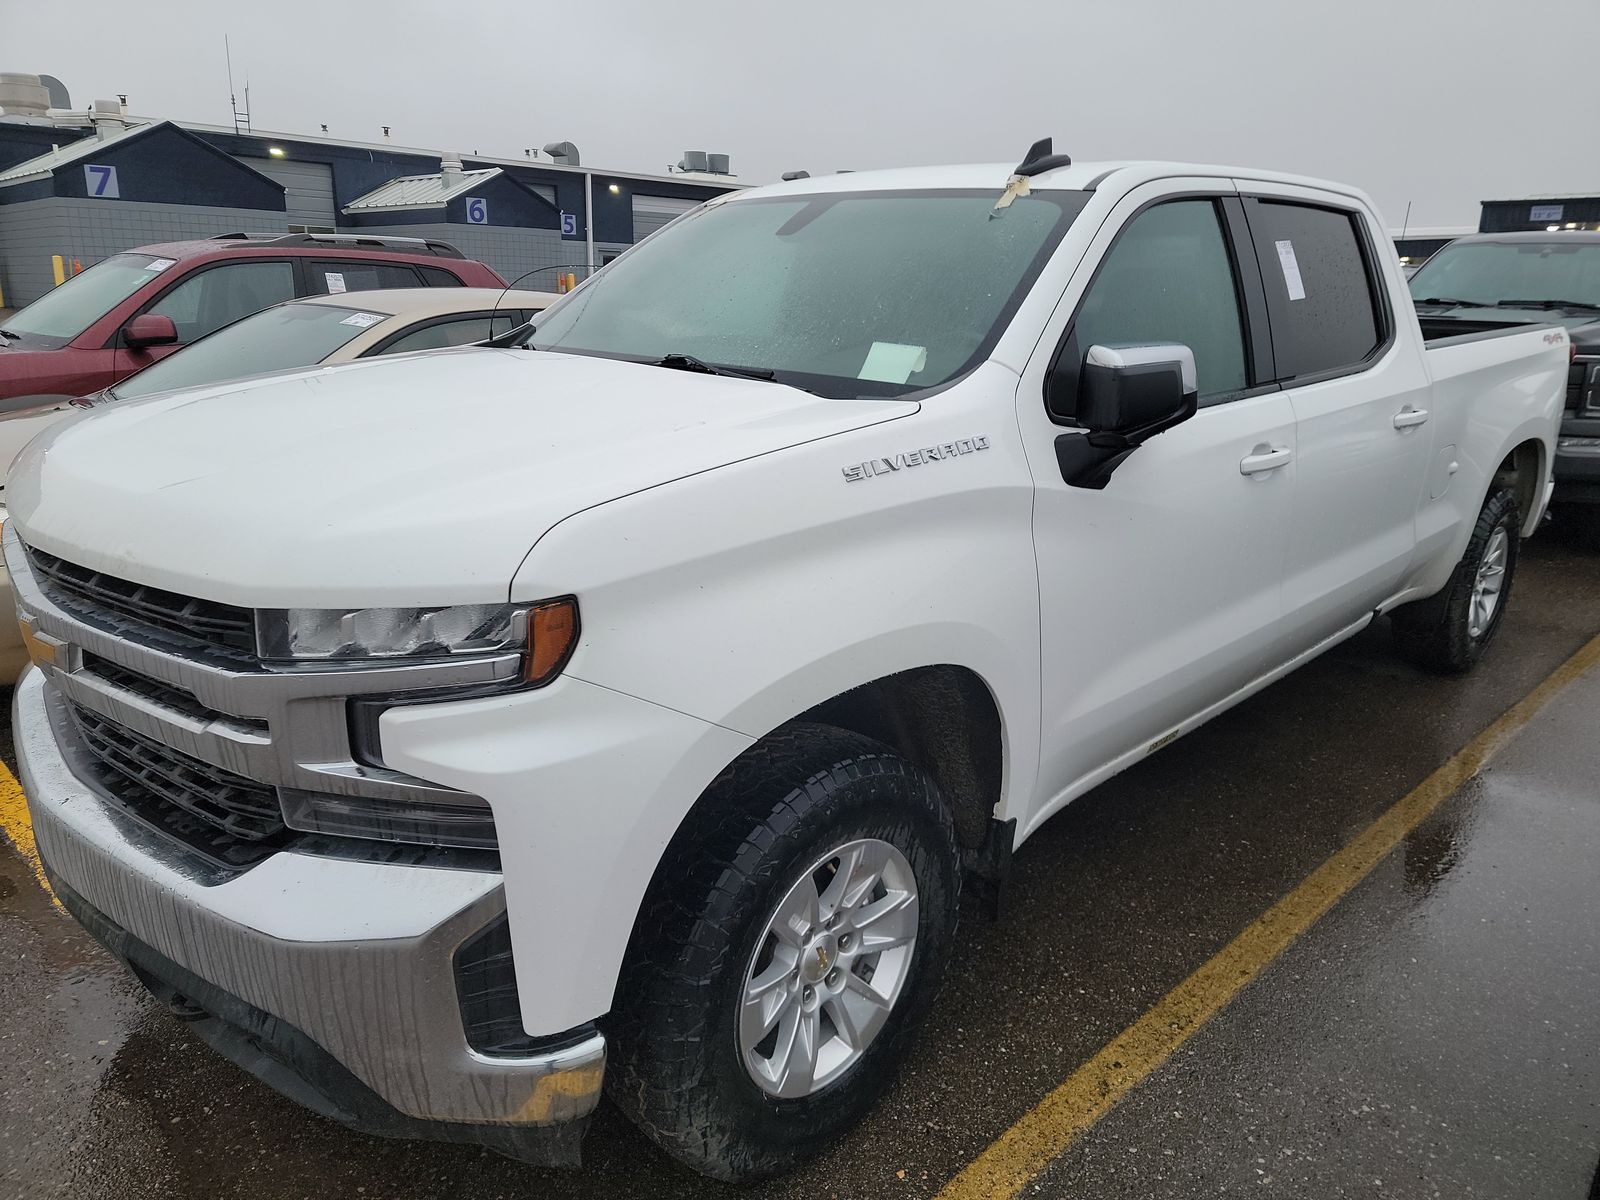 Used 2021 Chevrolet Silverado 1500 LT with VIN 3GCUYDED3MG117117 for sale in Minneapolis, Minnesota